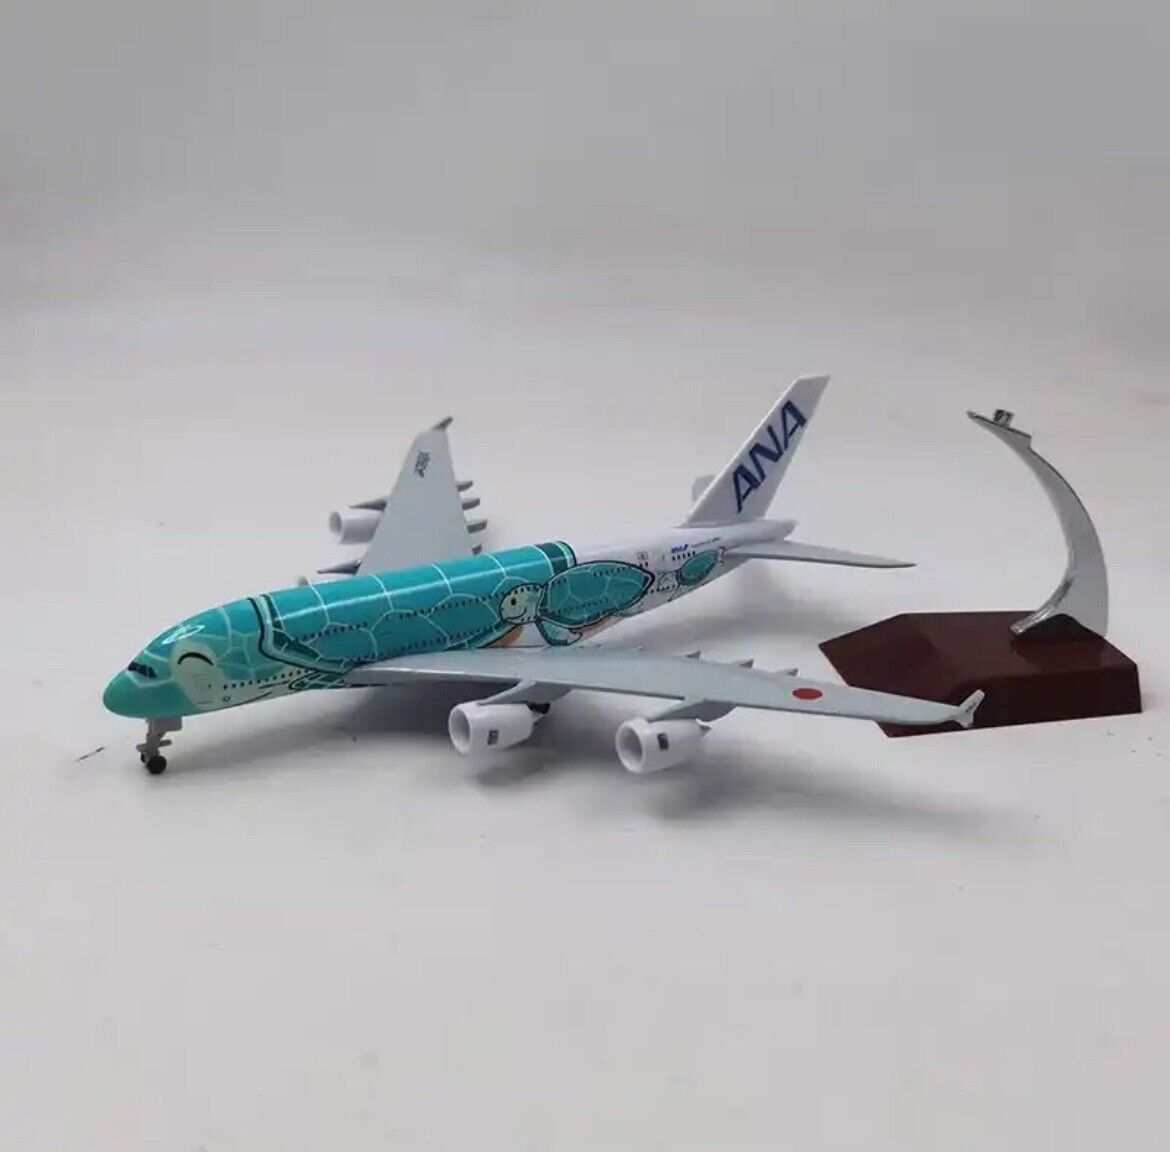 1/400 Scale Airplane Model - ANA Airbus A380 Blue Livery With Landing Gears